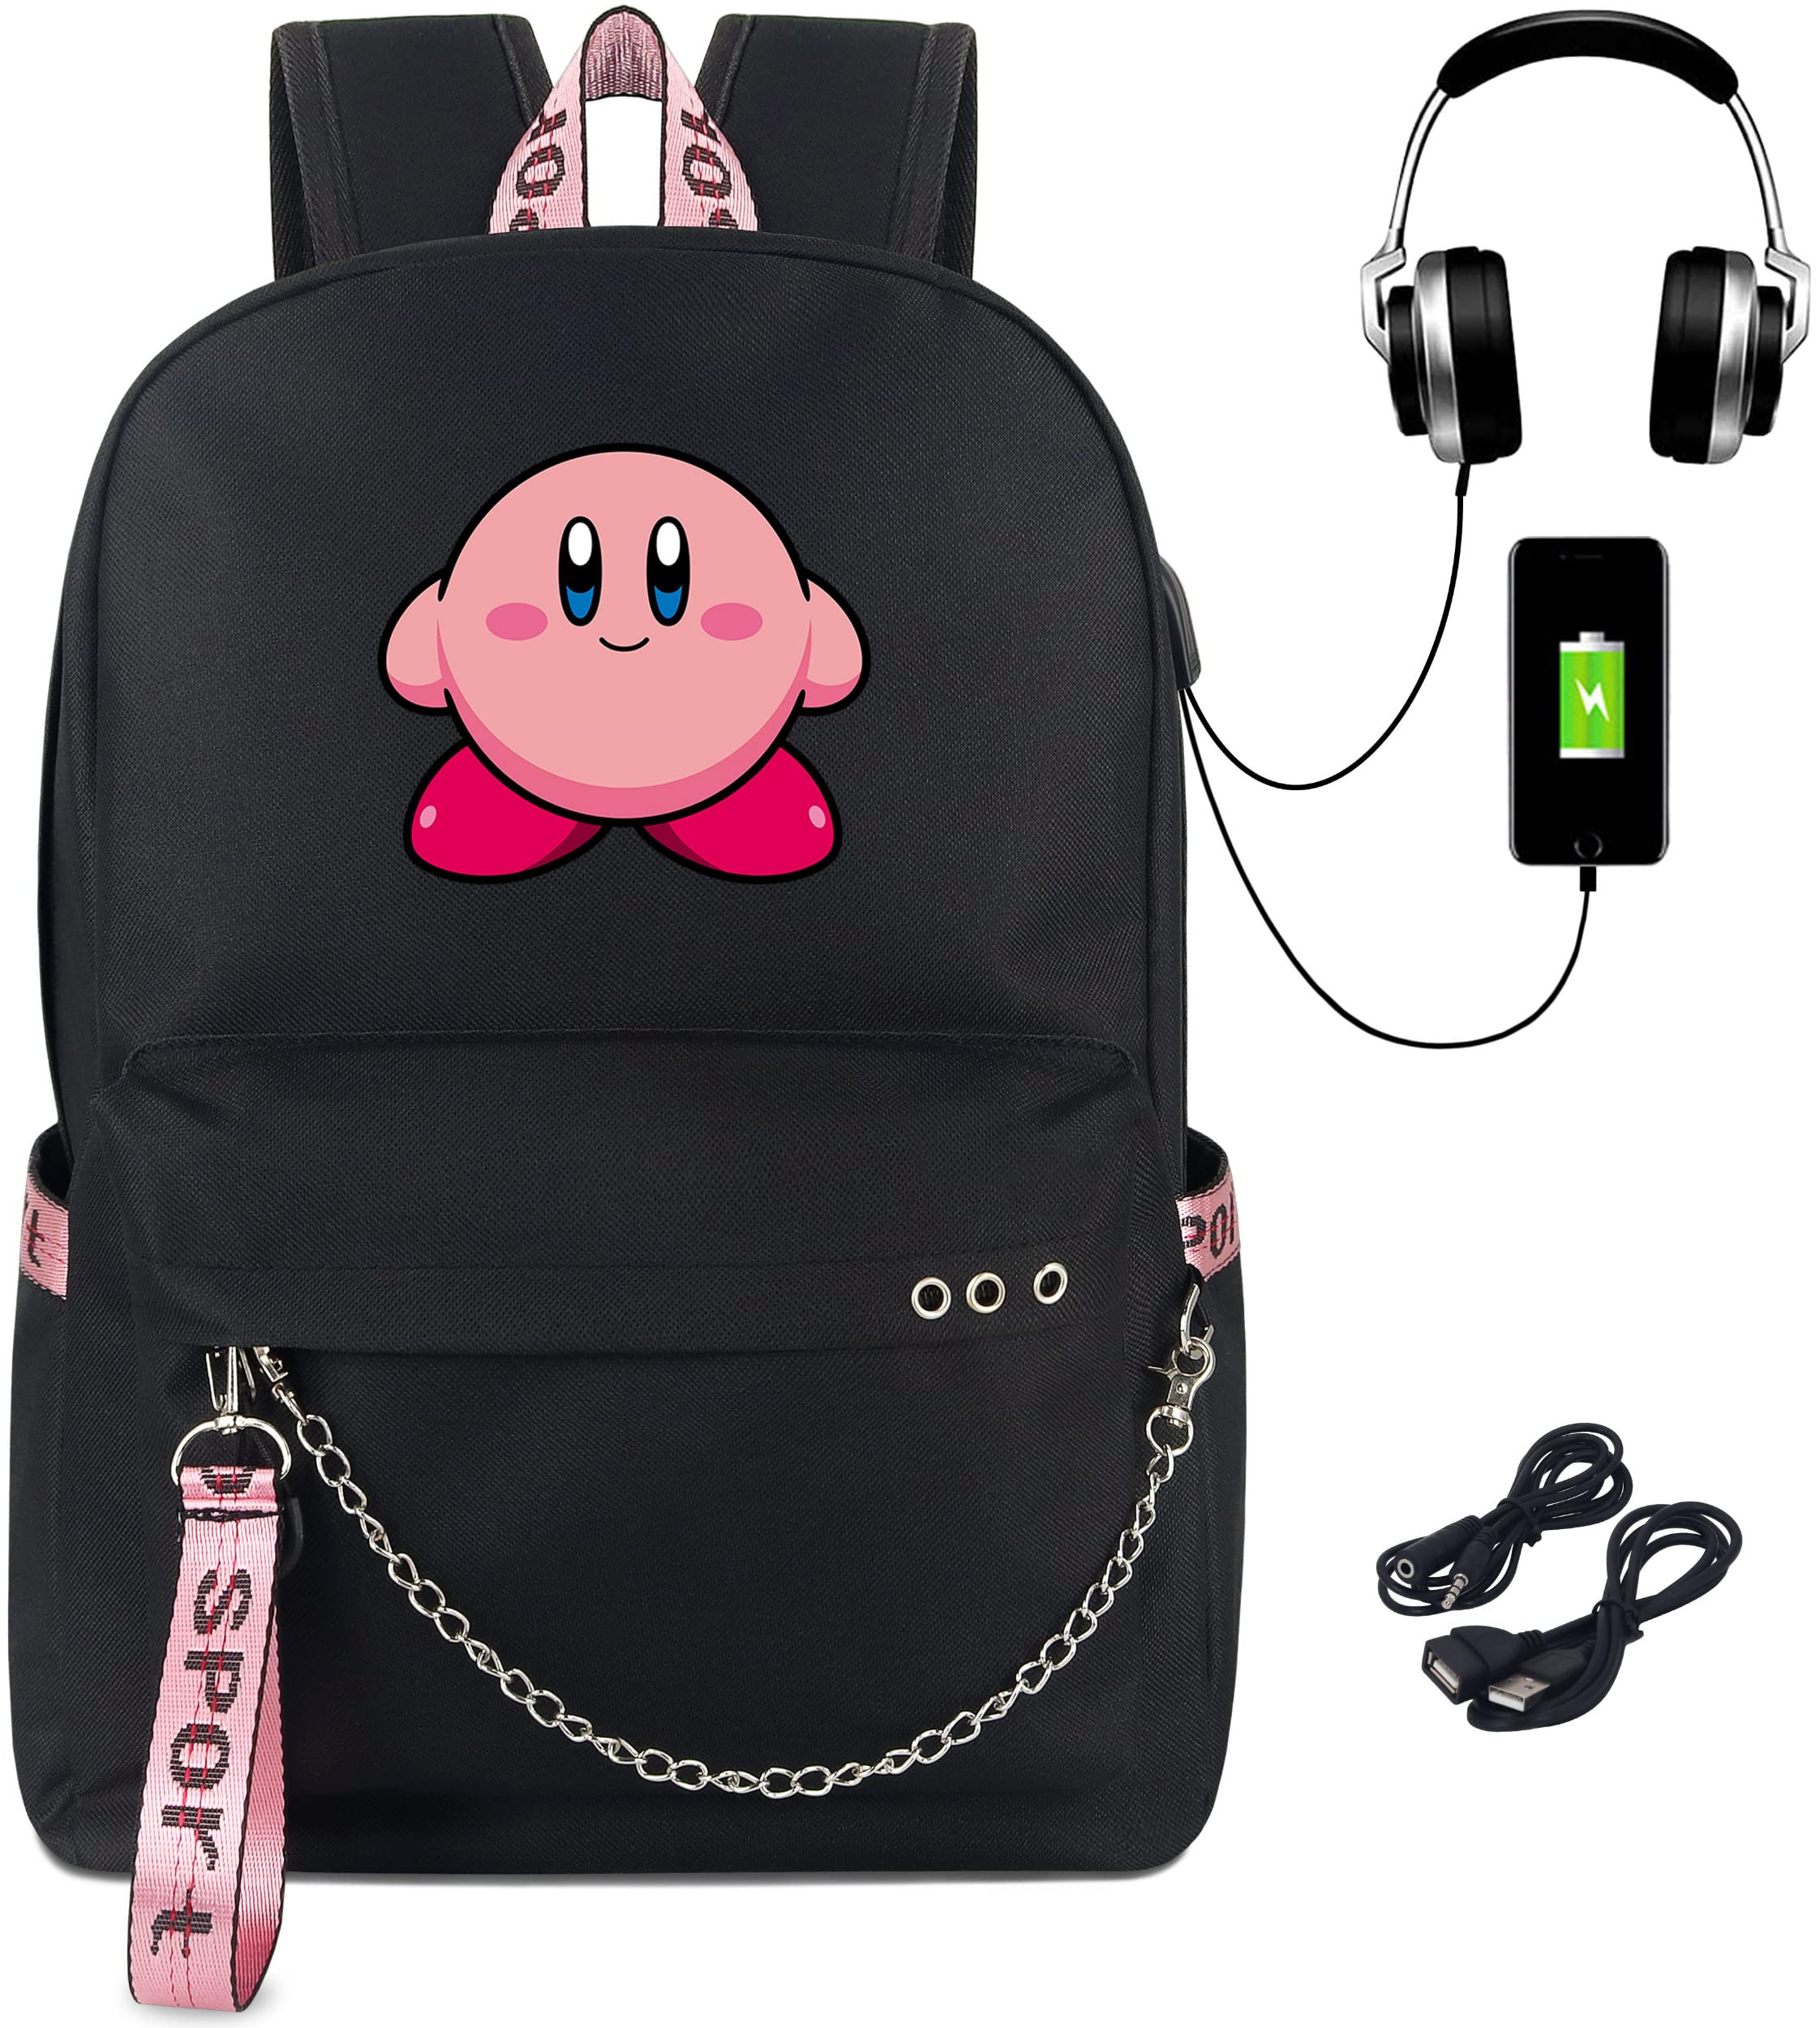 Roffatide Anime Backpack Book Bag Laptop School Bag with USB Charging Port and Headphone Port